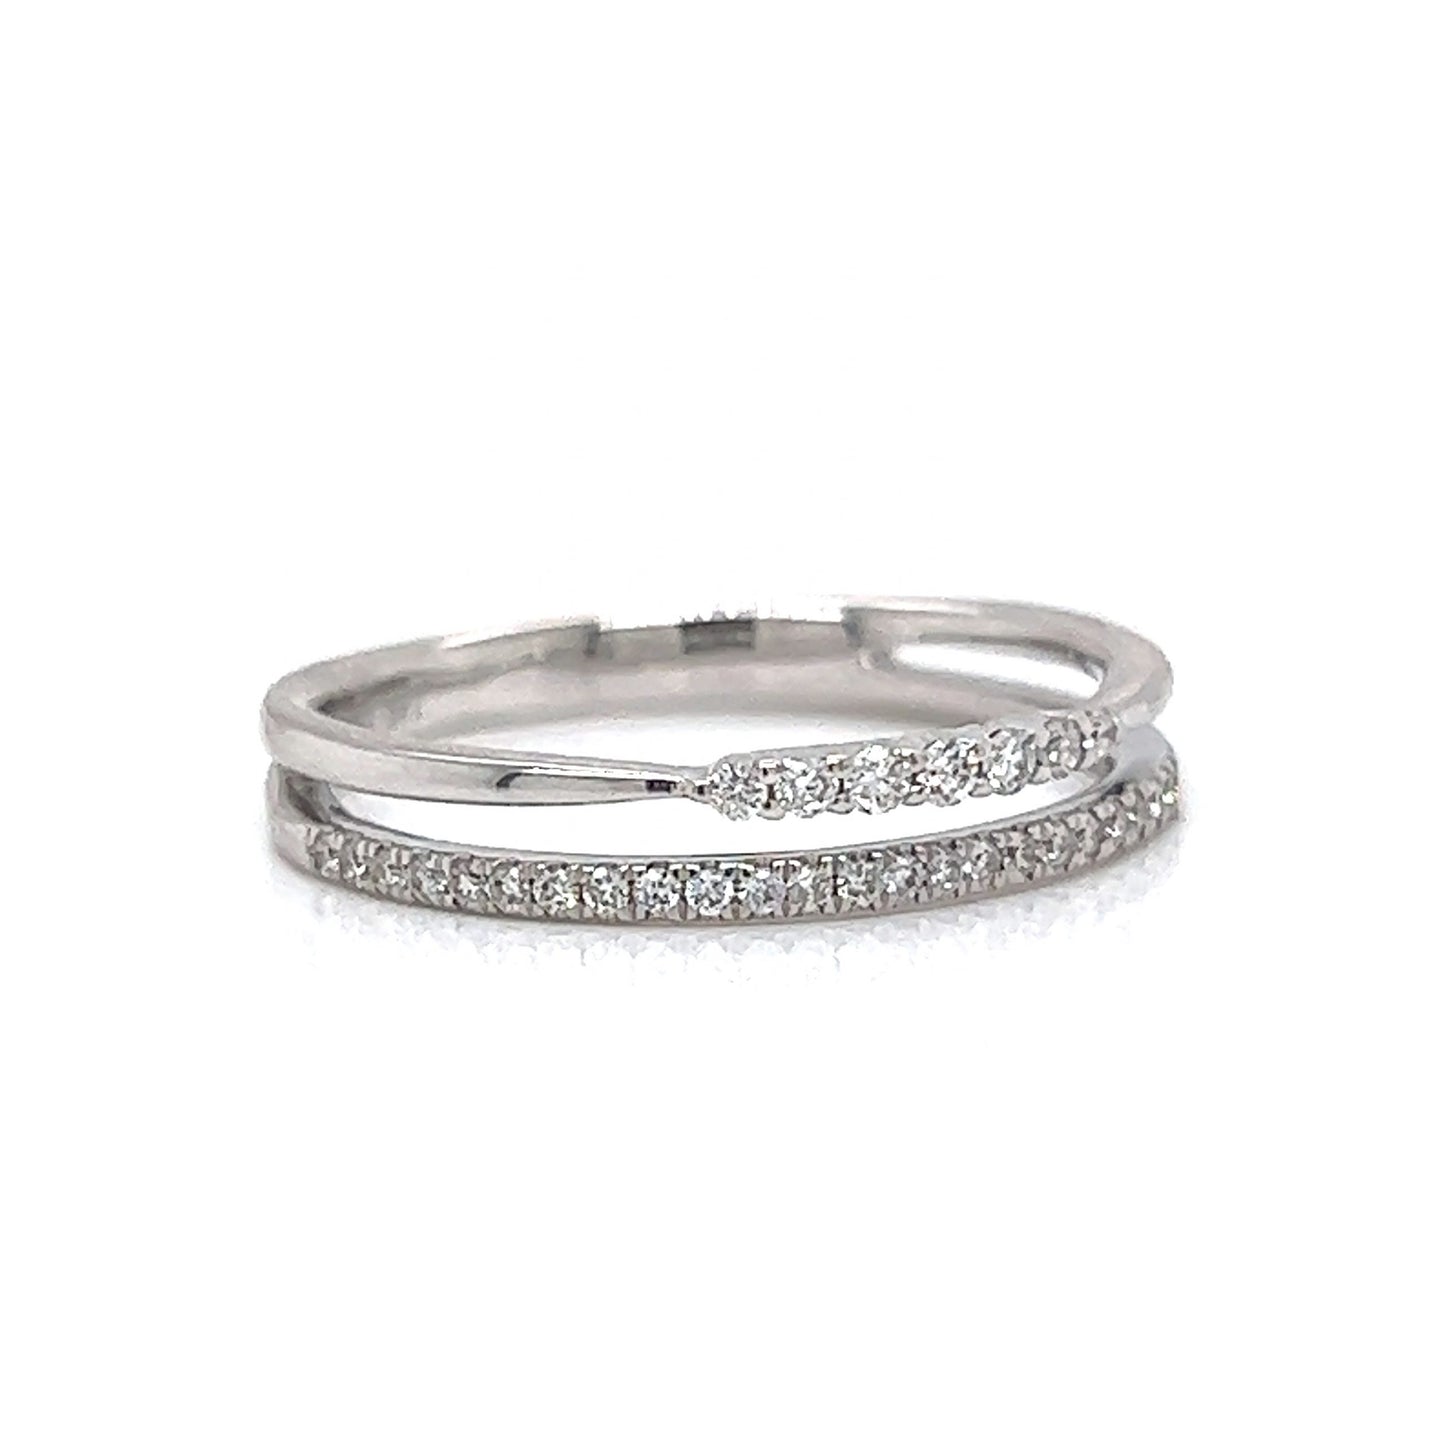 Thin Double Band Pave Diamond Stacking Ring in 14k White Gold